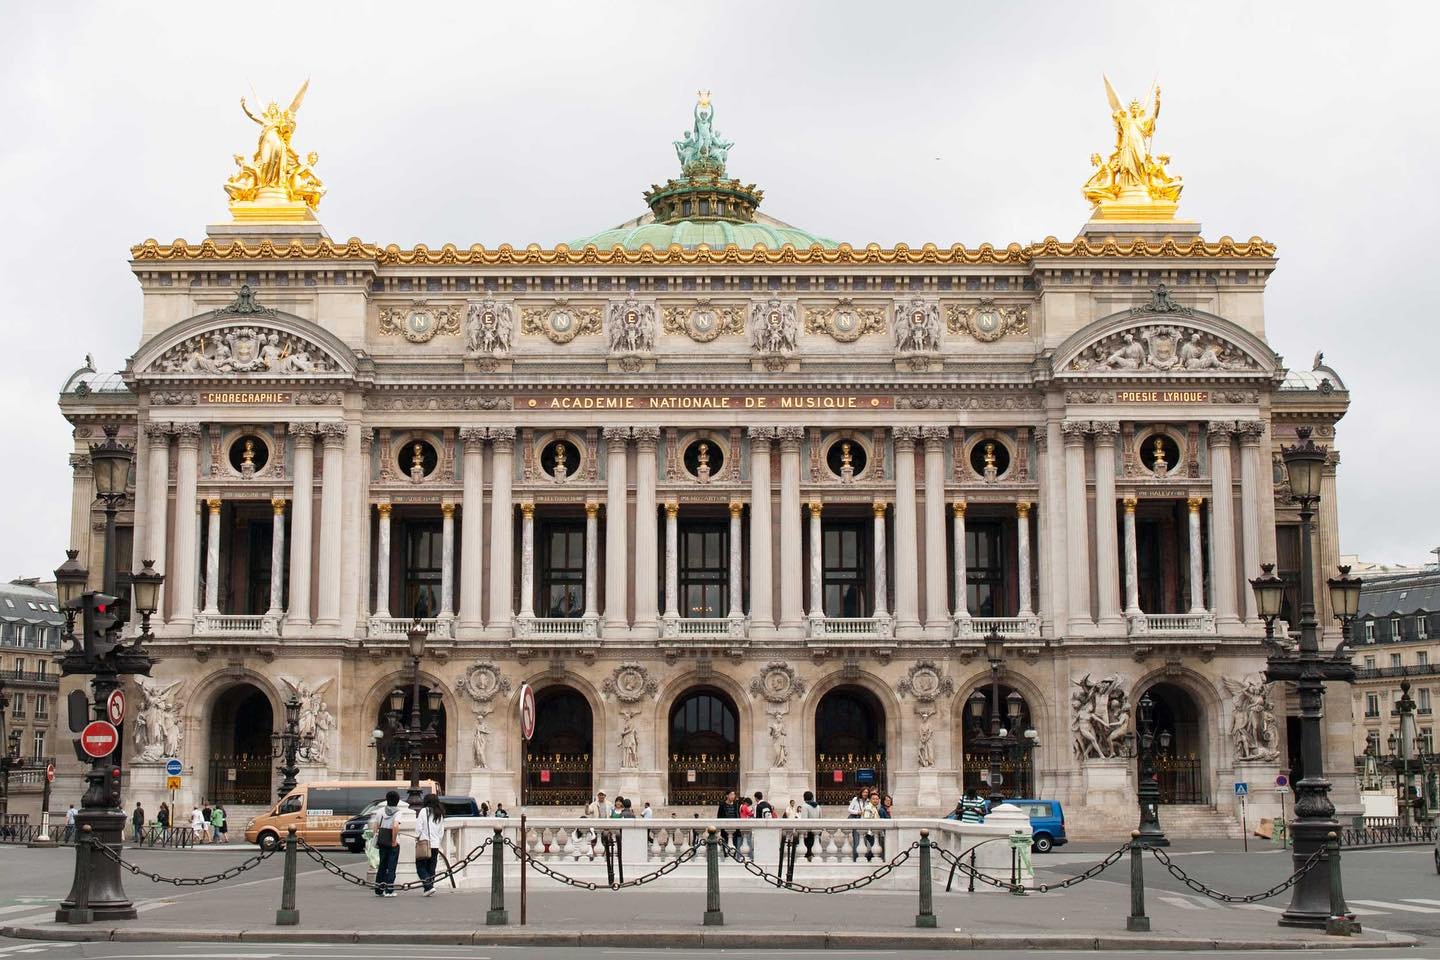 In the 9th arrondissement is Op&eacute;ra de Palais Garnier. 
Photos by @chrishandel_photographer 
Built  between 1861-1875, at the request  of Napoleon III, the architect was Charles Garnier, who is buried in Montparnasse Cemetry. This building was 